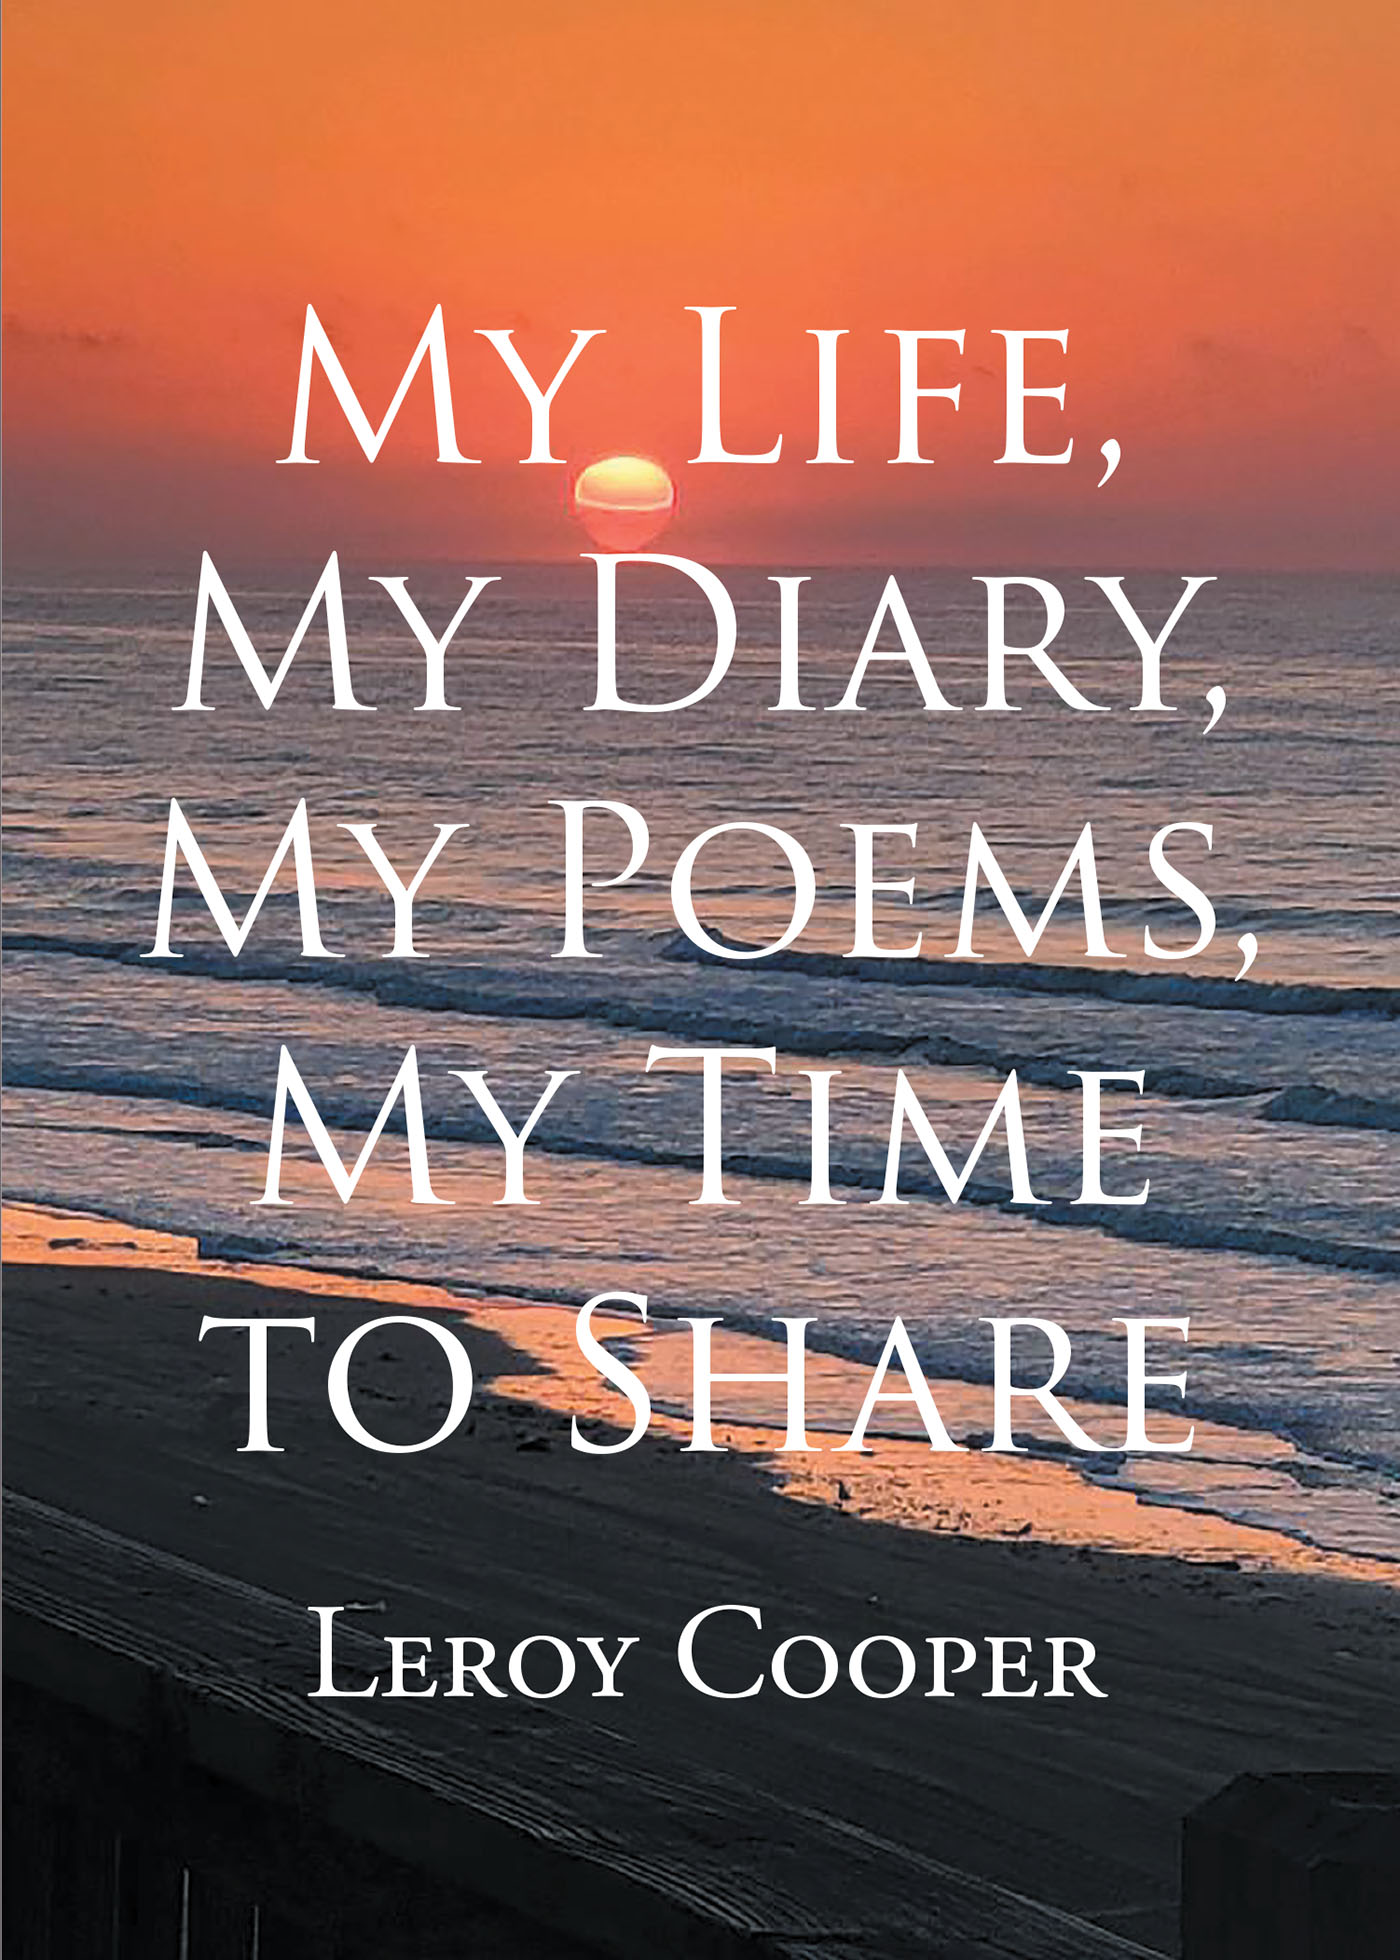 Leroy Cooper’s New Book, “My Life, My Diary, My Poems, My Time to Share,” is a Gripping Collection of Poetry That Chronicles the Author’s True-Life Experiences